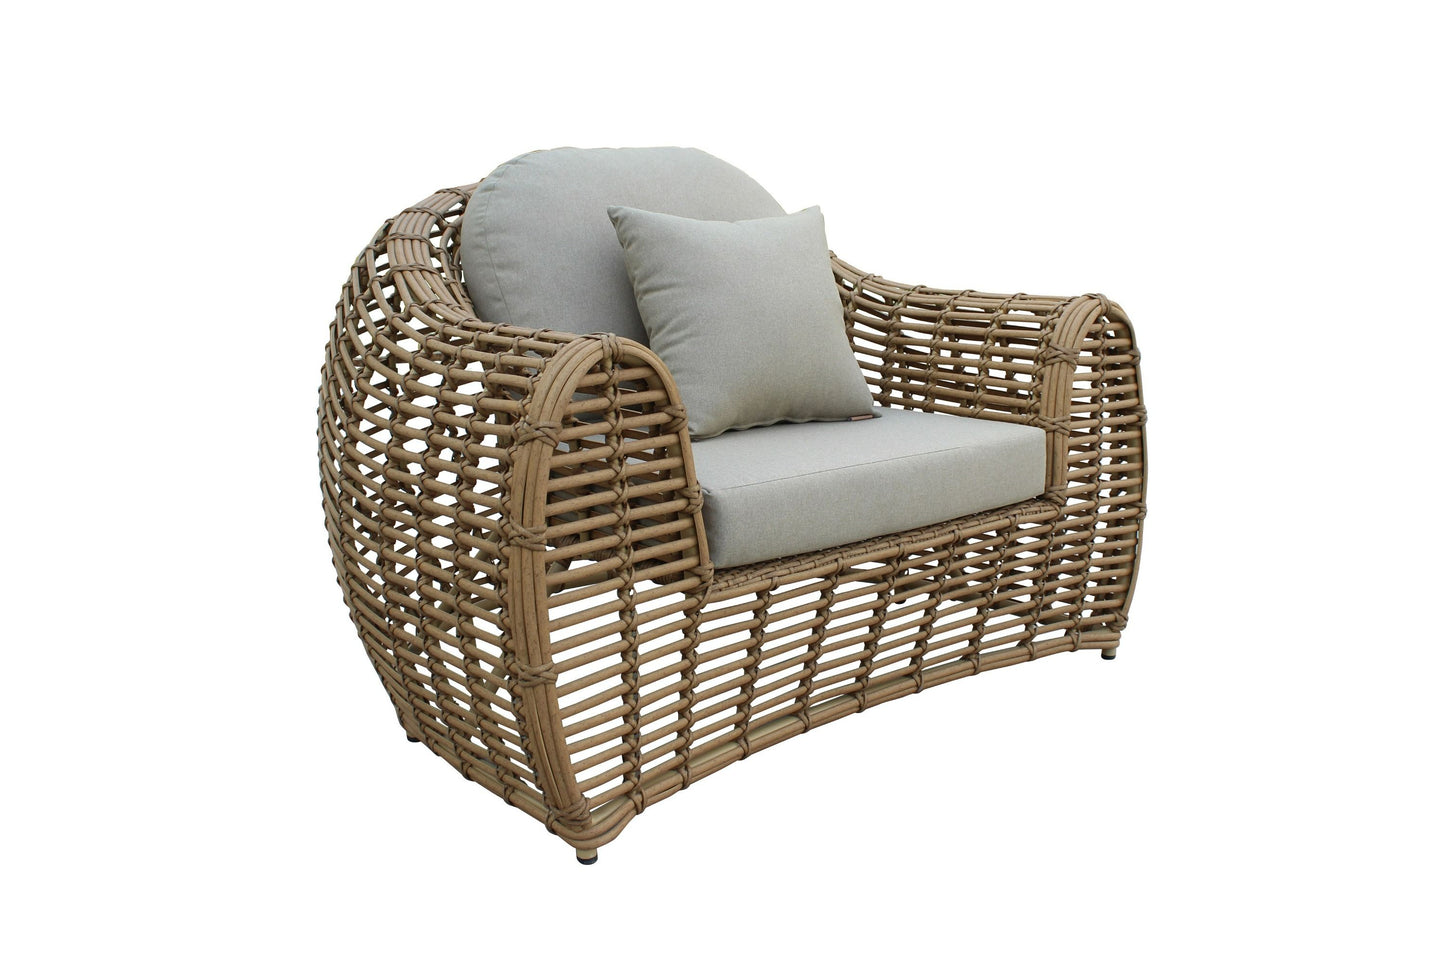 Sandra - Outdoor Beige + Wicker Sofa Set With End Table